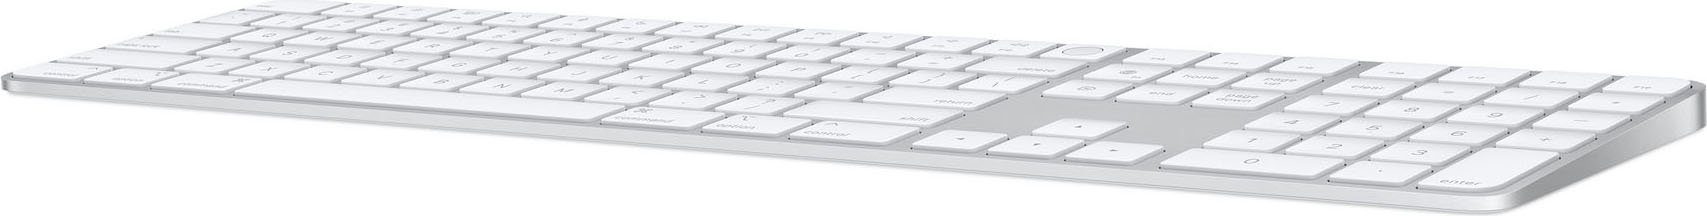 Apple Magic Keyboard Mac ID for and Keypad Apple-Tastatur with Numeric Touch